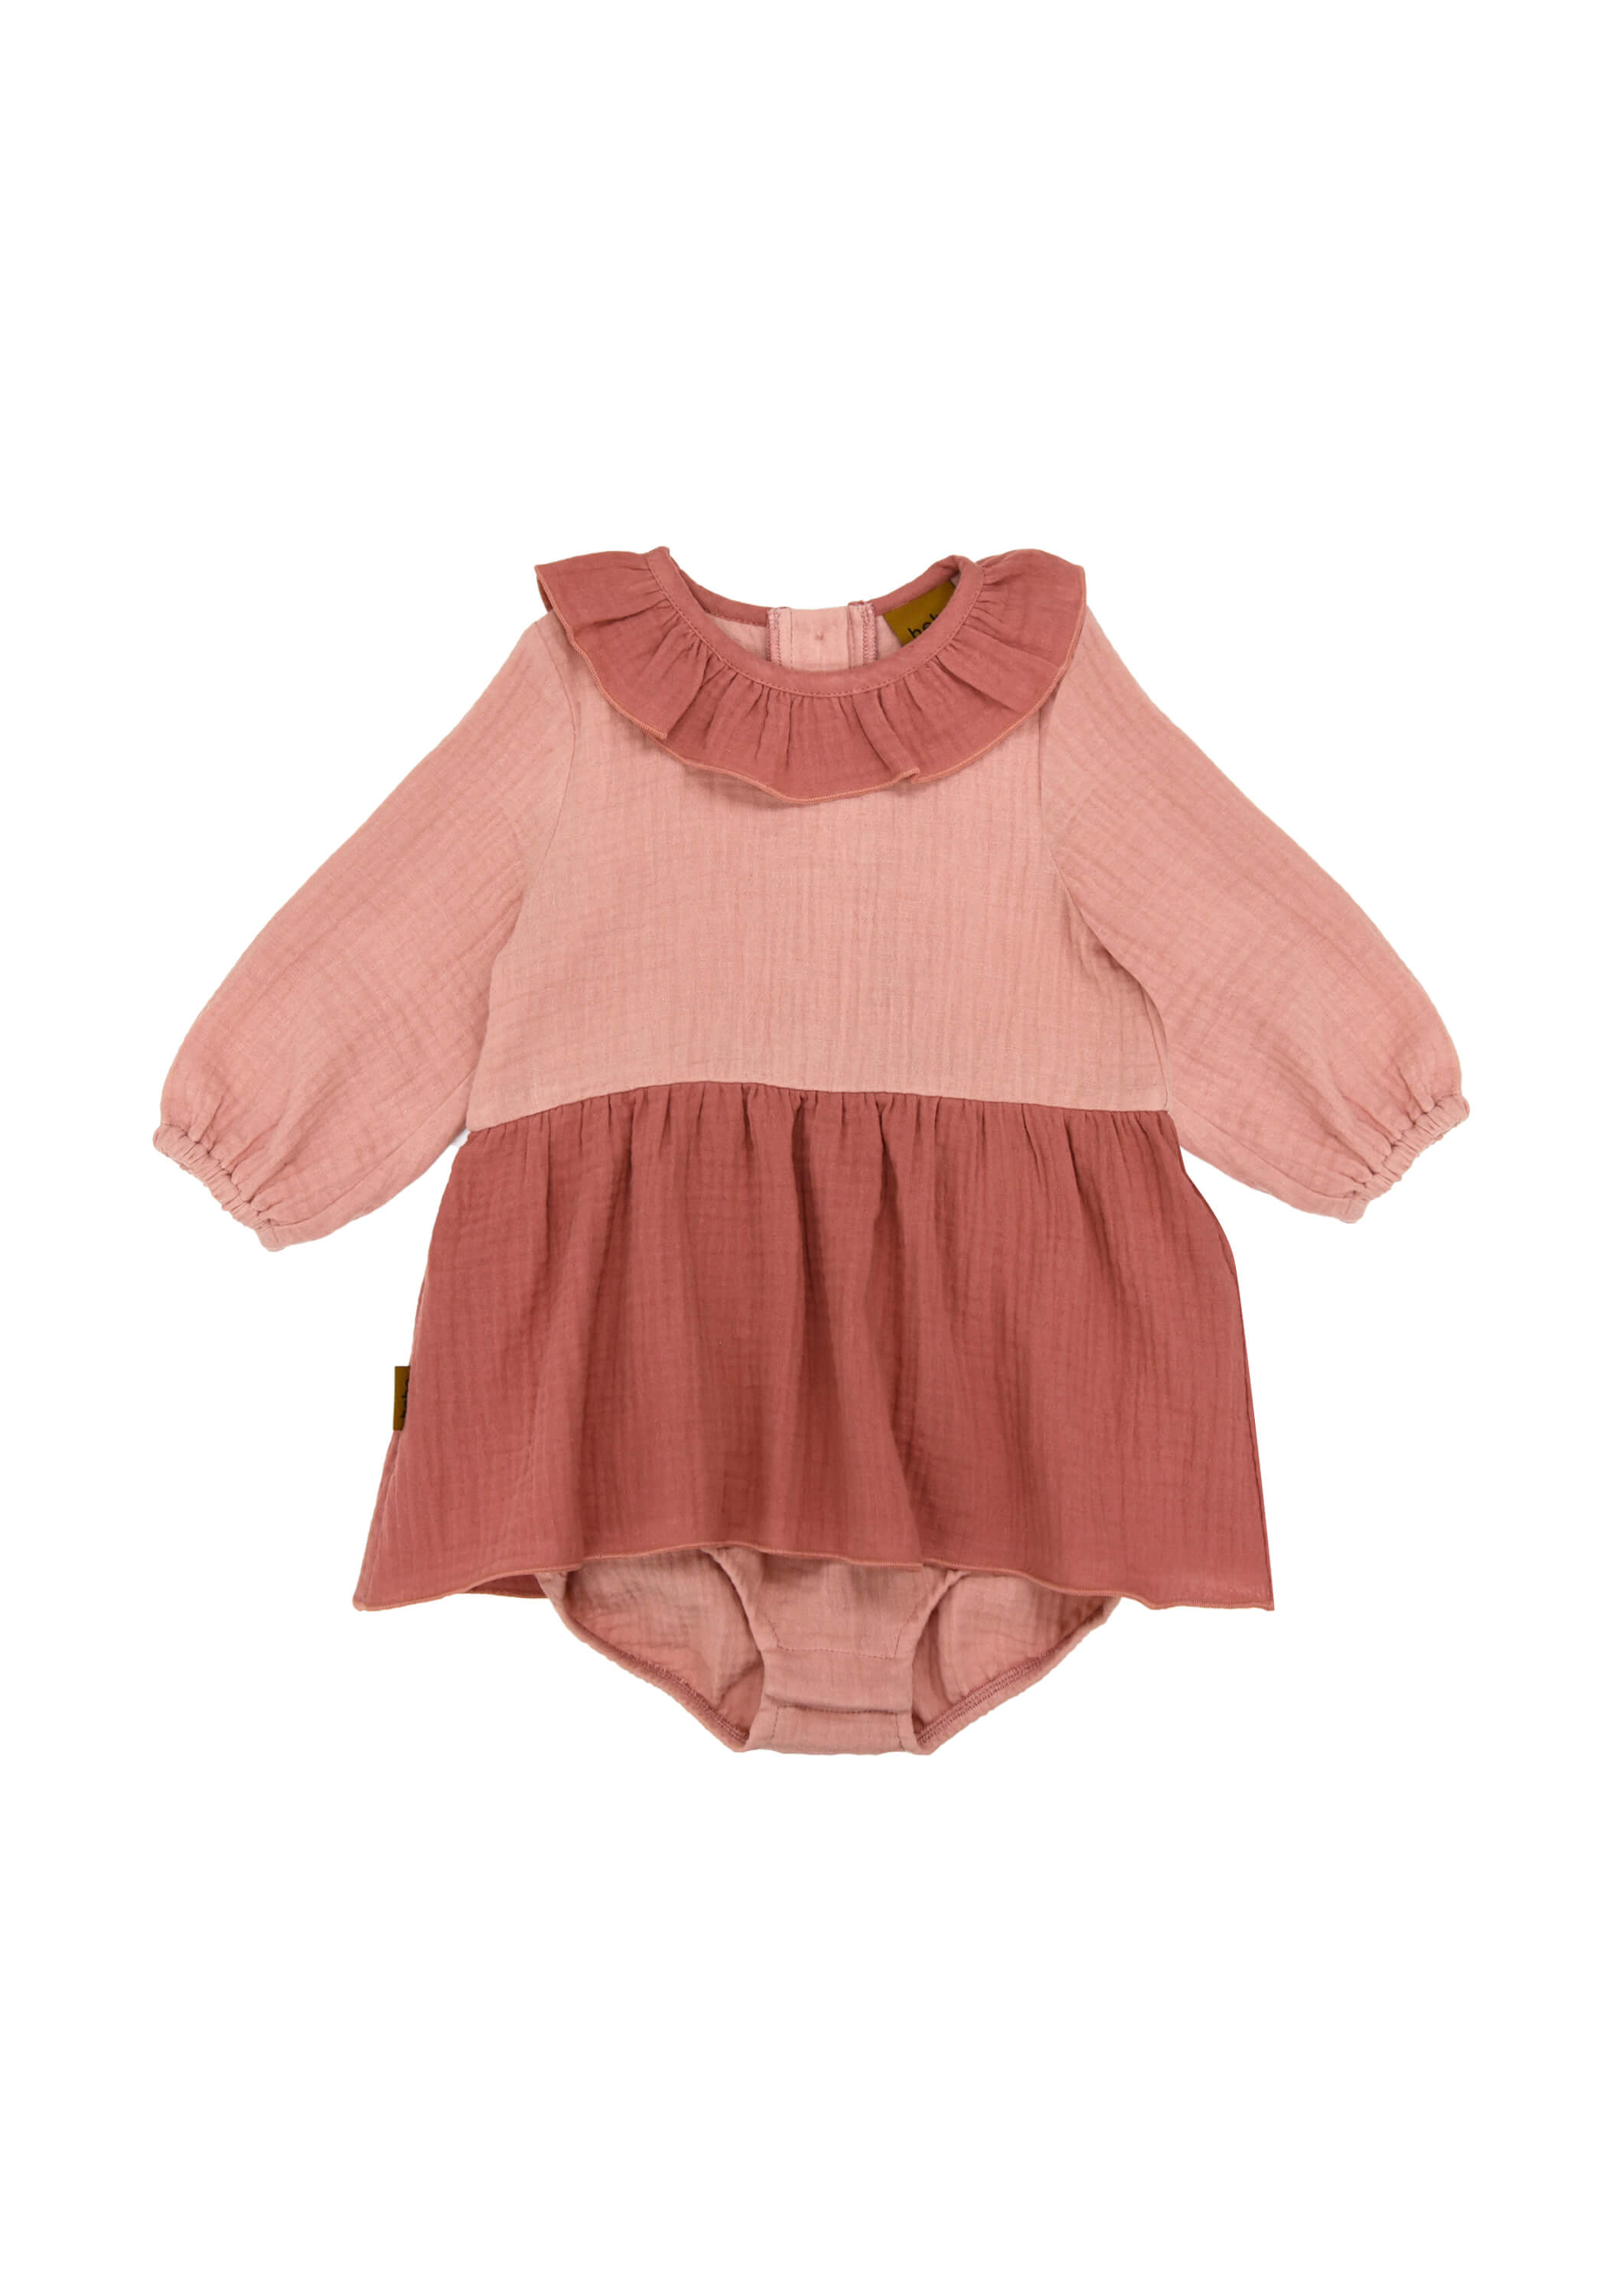 Shop a stunning pink muslin body dress for adorable baby girls online in Hong Kong and Singapore at Milimilu. Stylish, practical and sophisticated baby clothing online for moms who care! Shop the best organic cotton clothing and organic muslin clothing, also the best and most thoughtful baby gifts and Christmas.